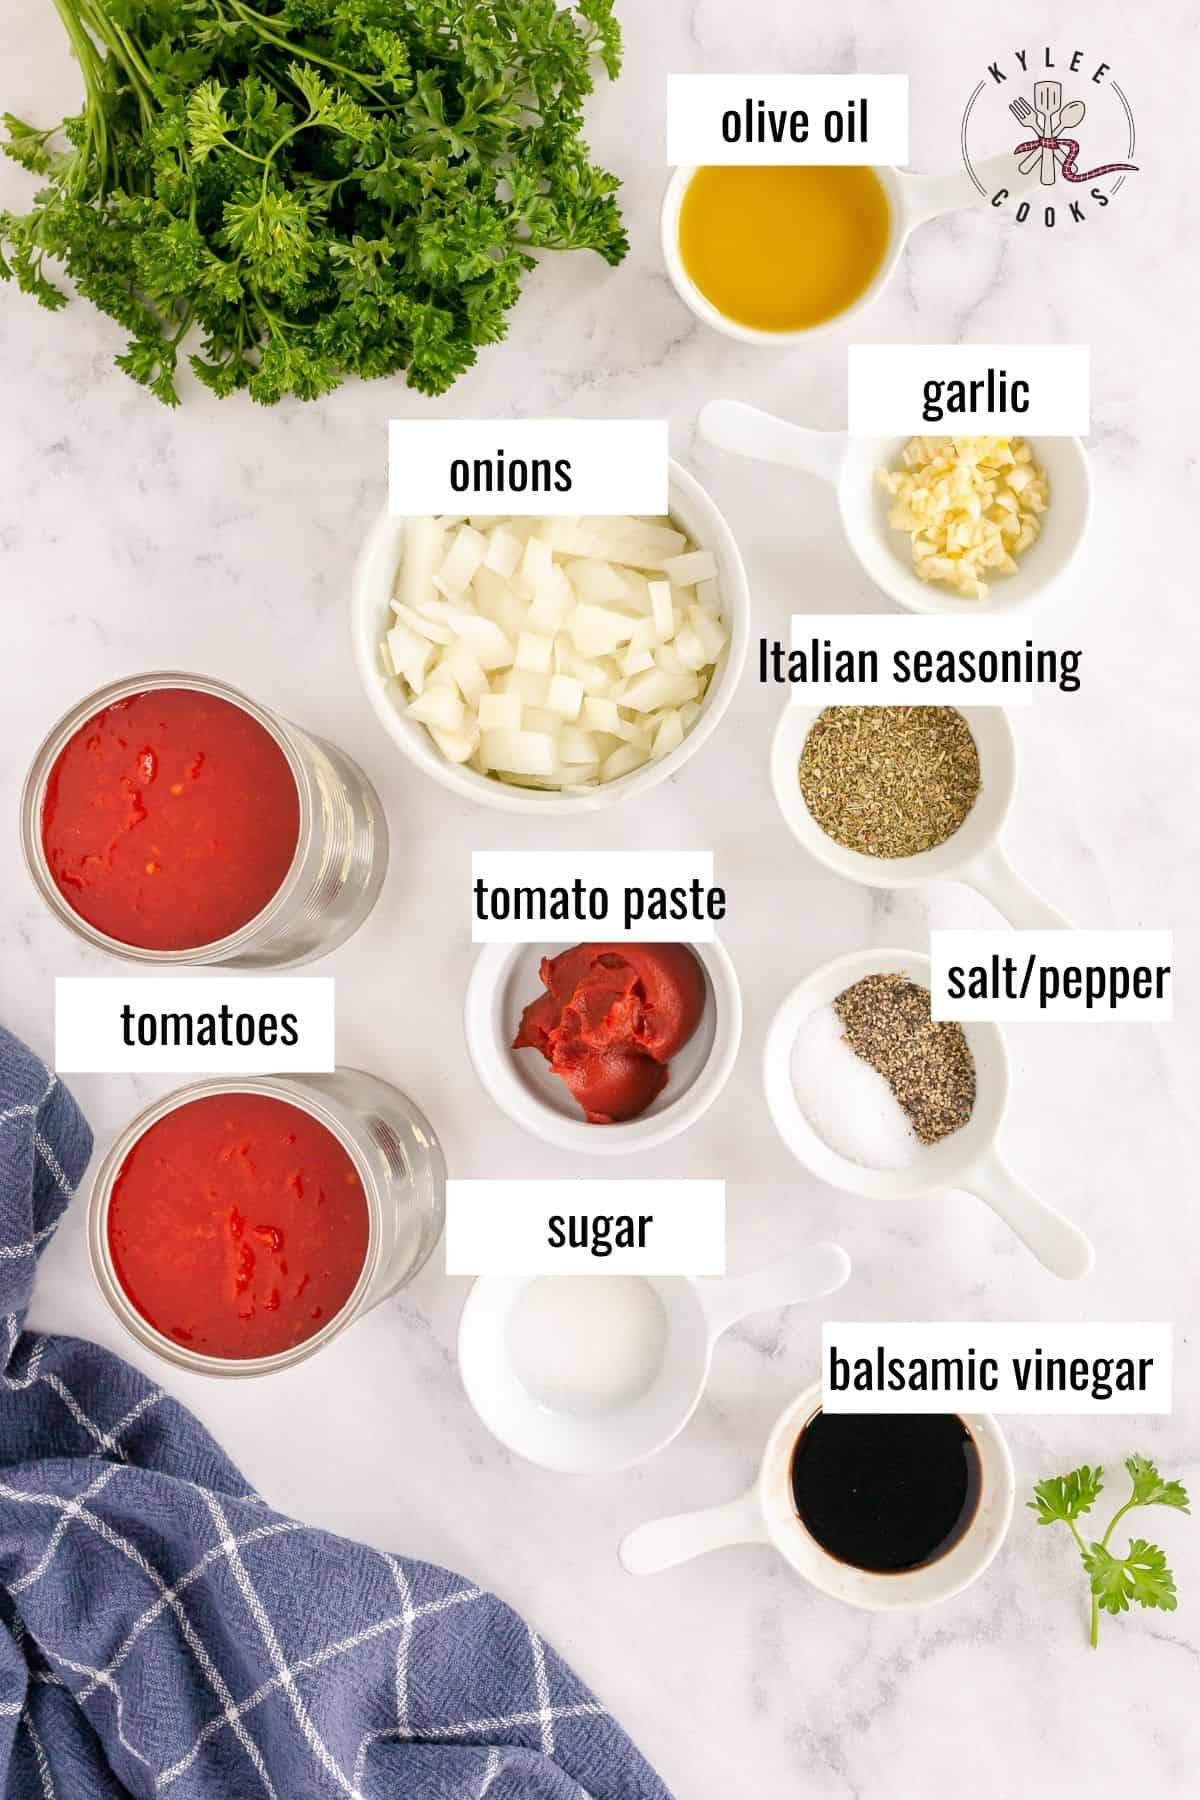 ingredients to make marinara sauce from scratch laid out and labeled